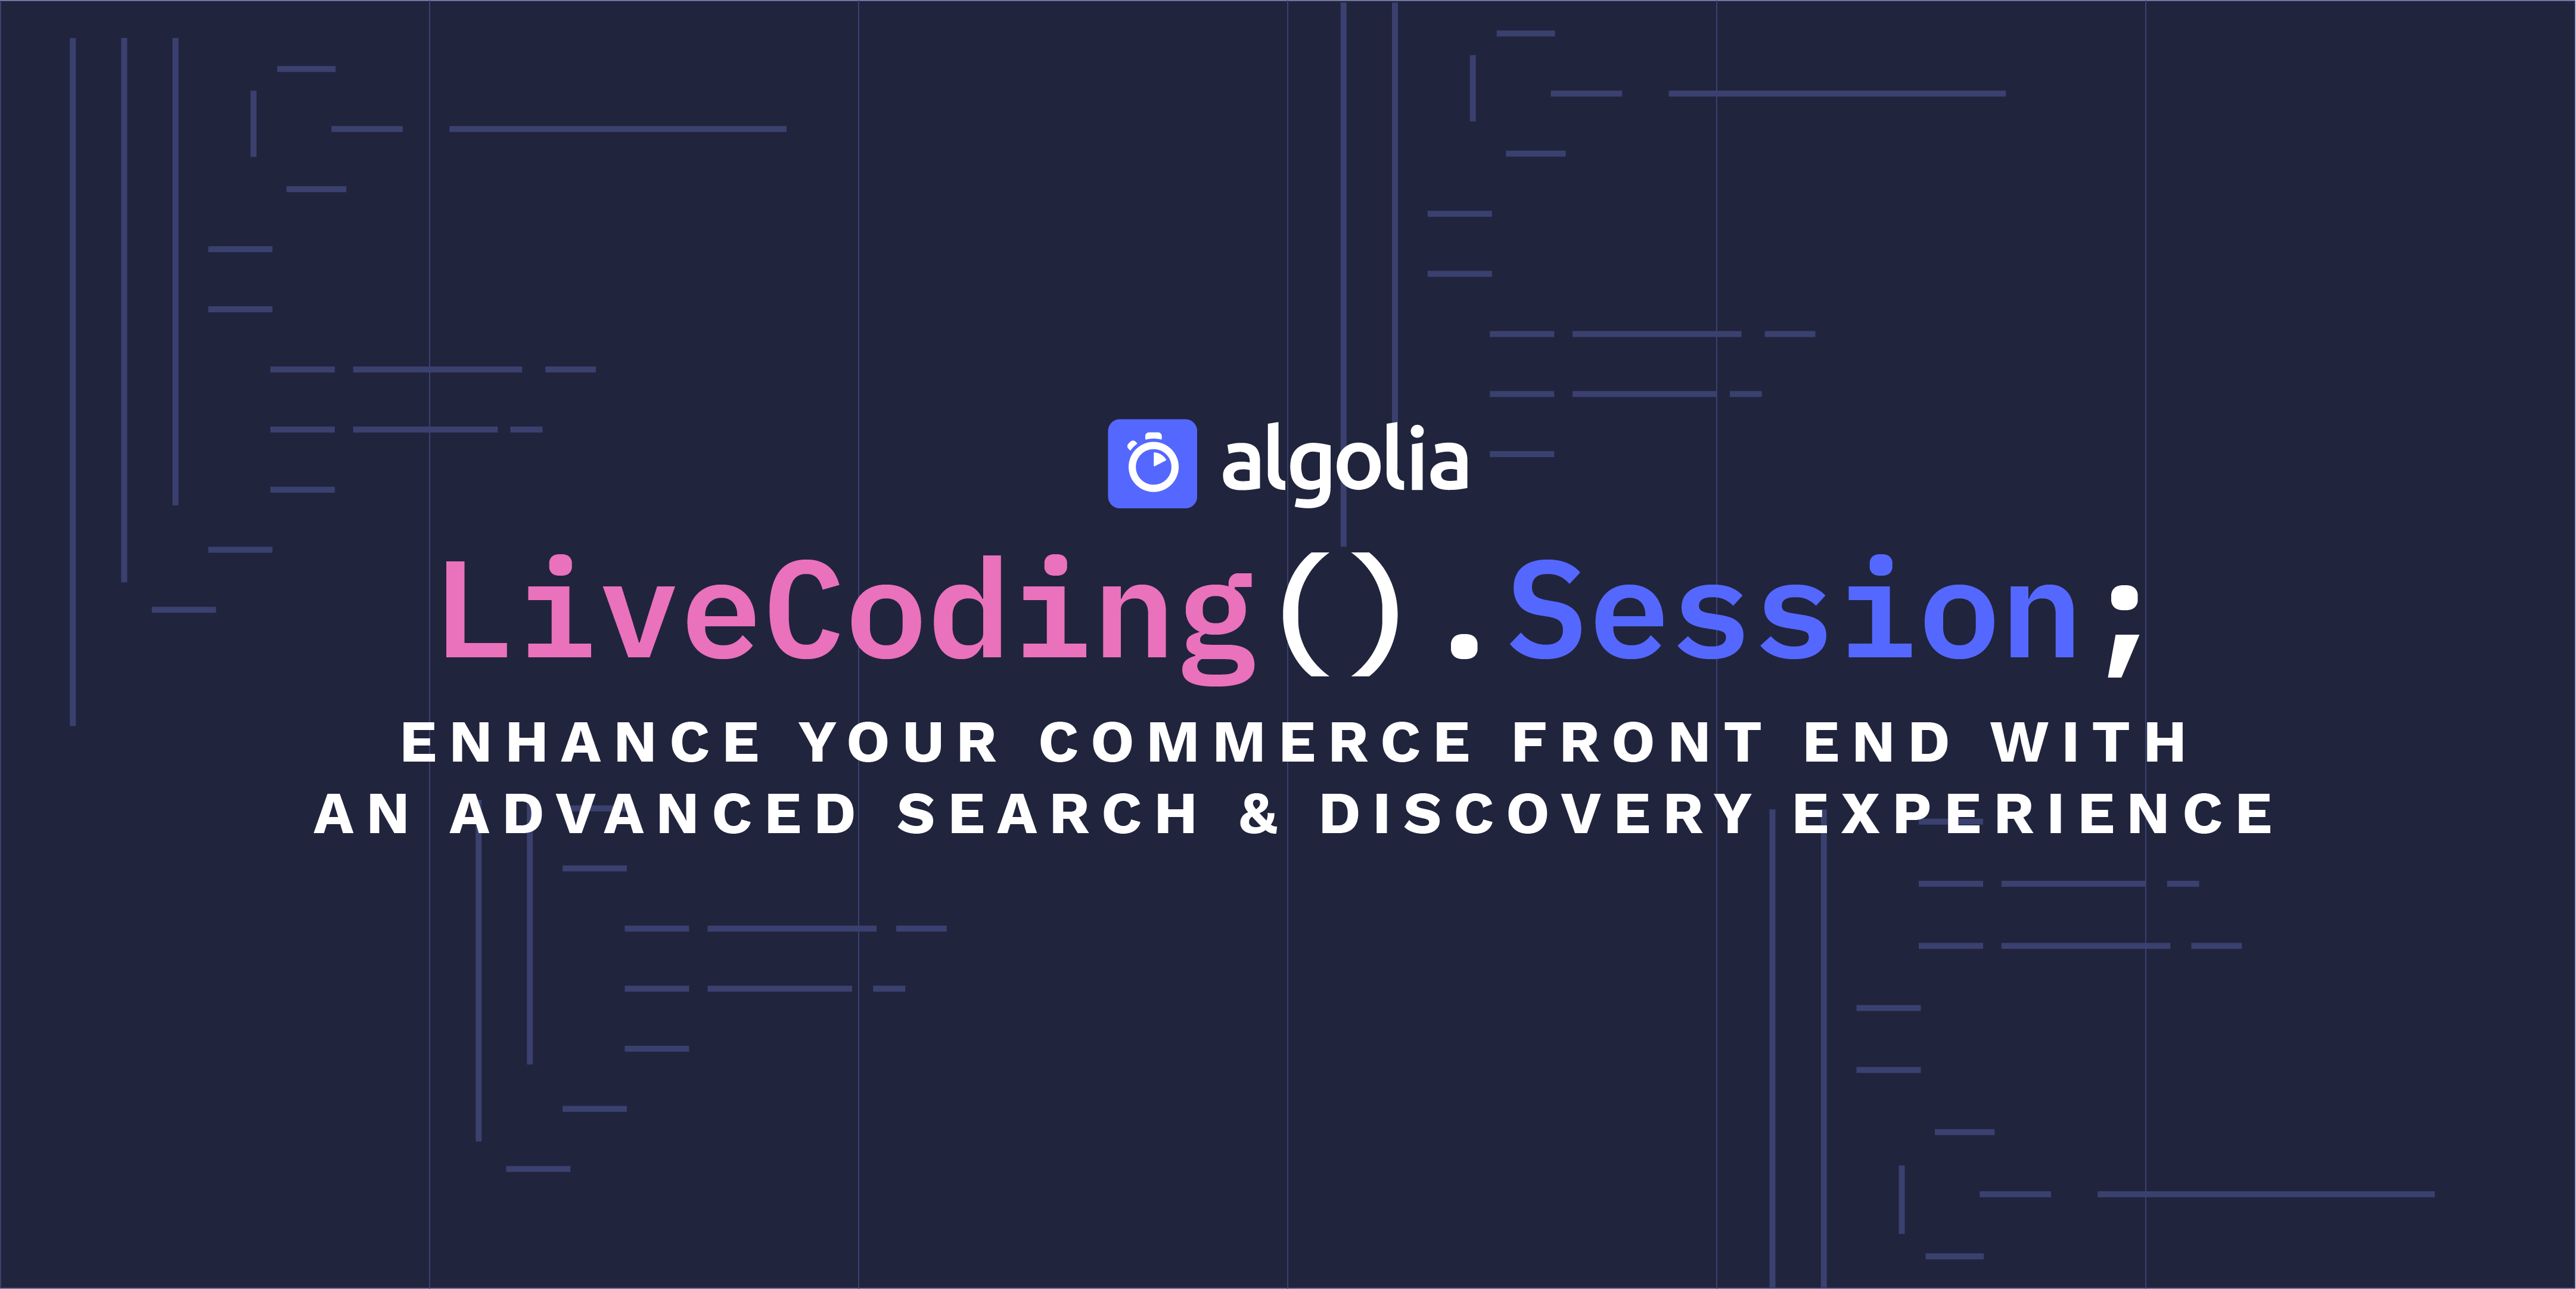 Livecoding session: Enhance your commerce front end with great search & discovery